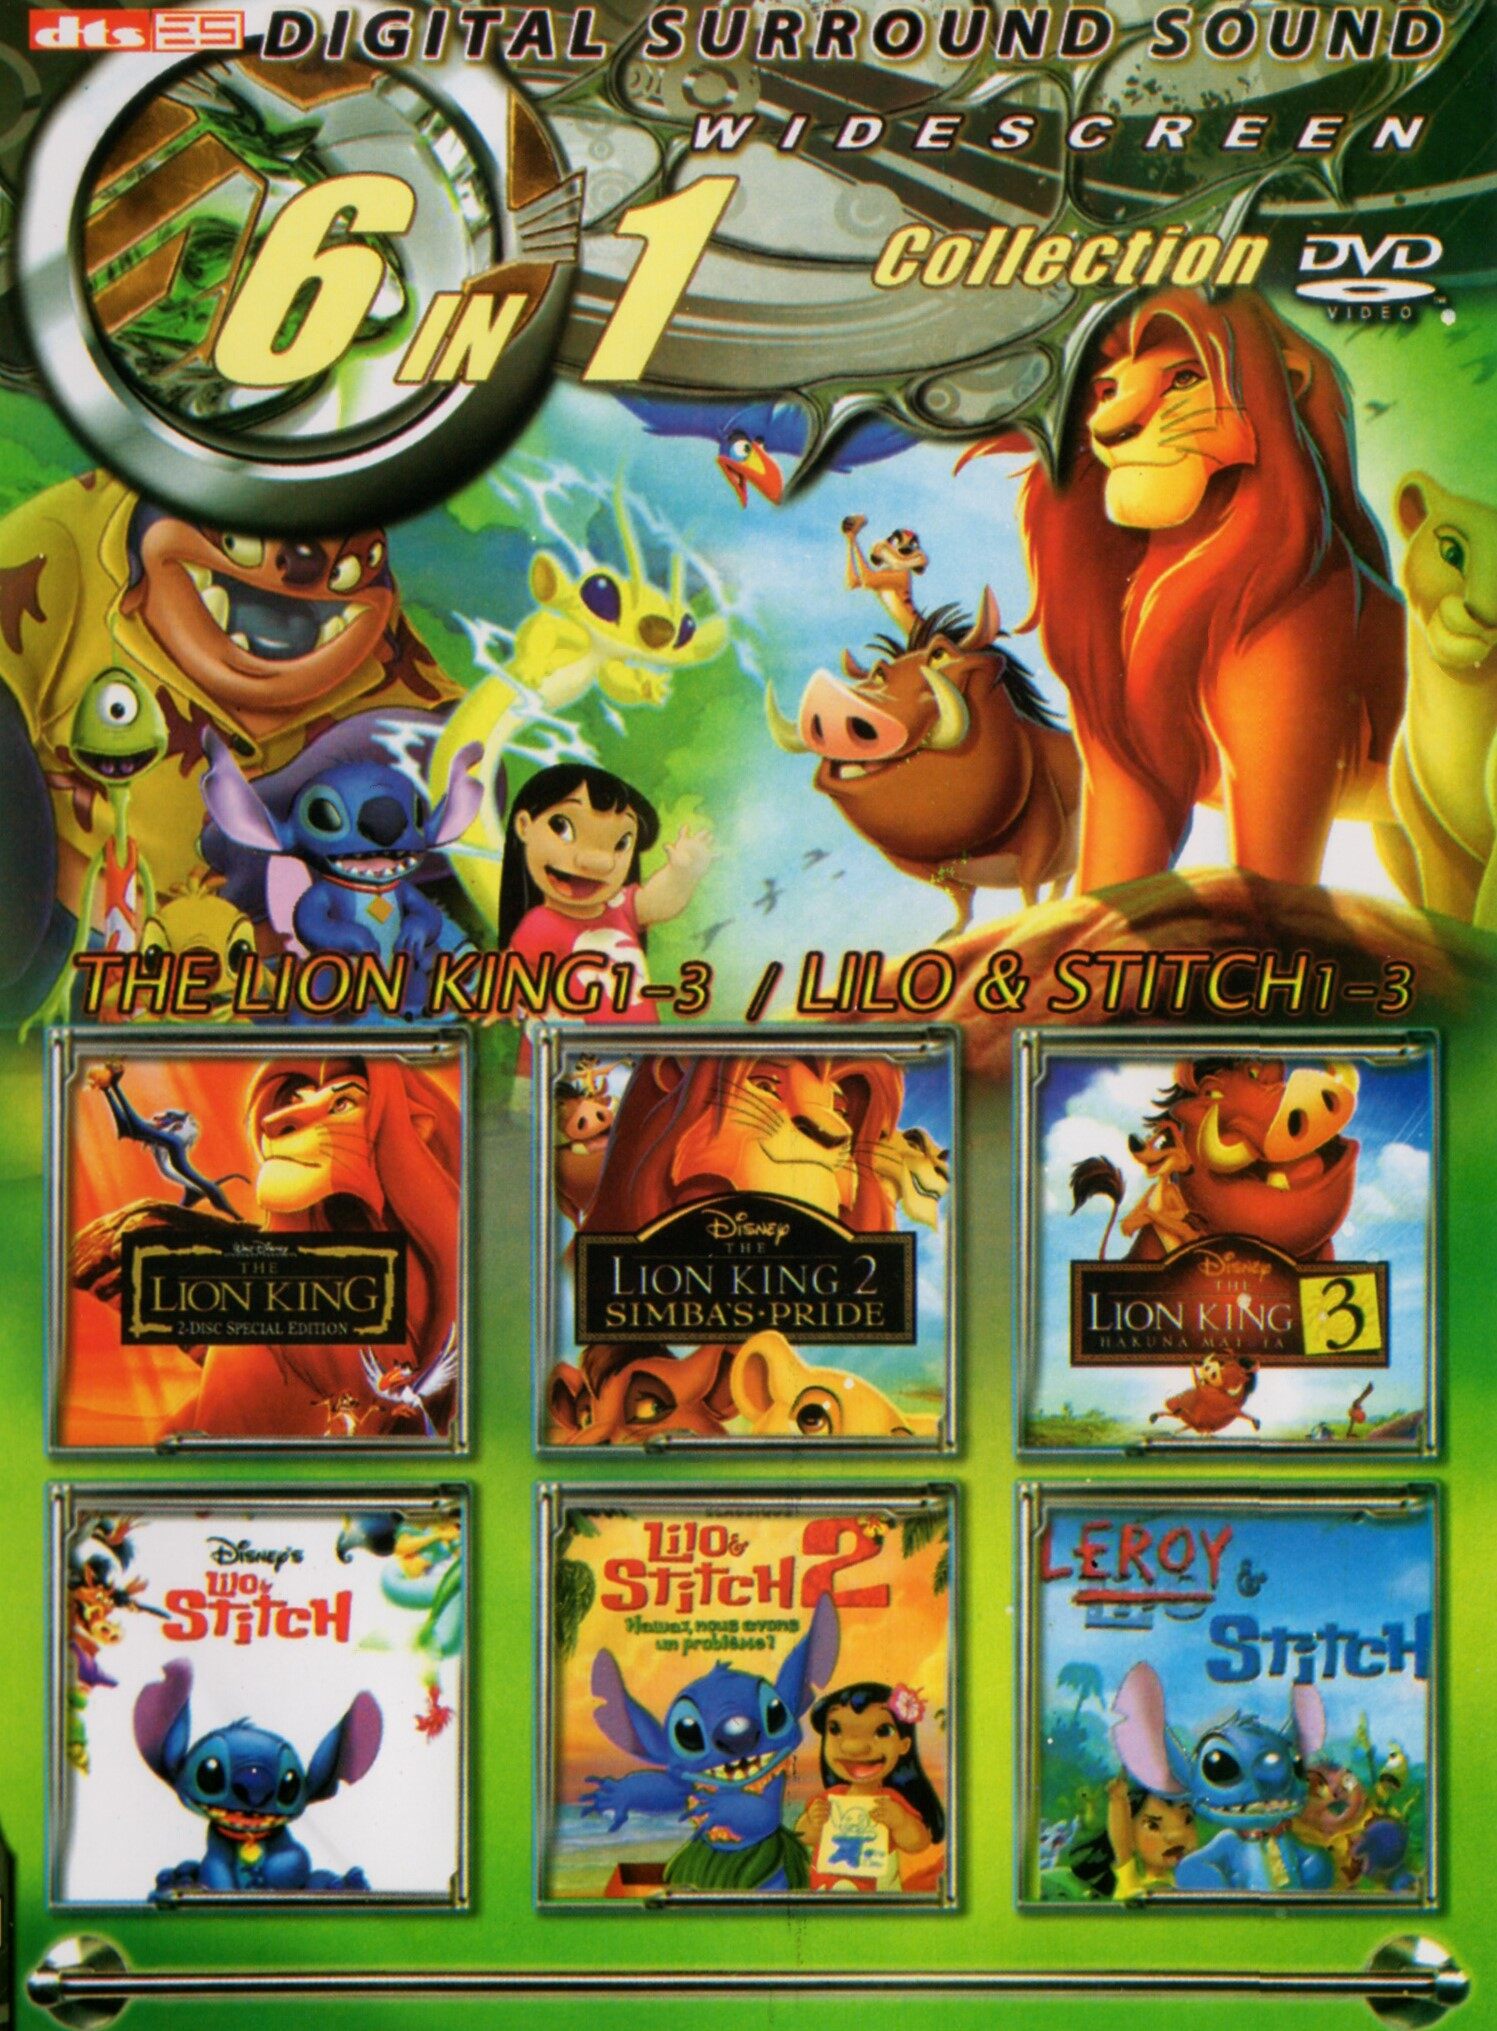 DVD Cartoon The Lion King & Lilo And Stitch 6 In 1 Collection J 1238 -  Movieland682786 | Lazada